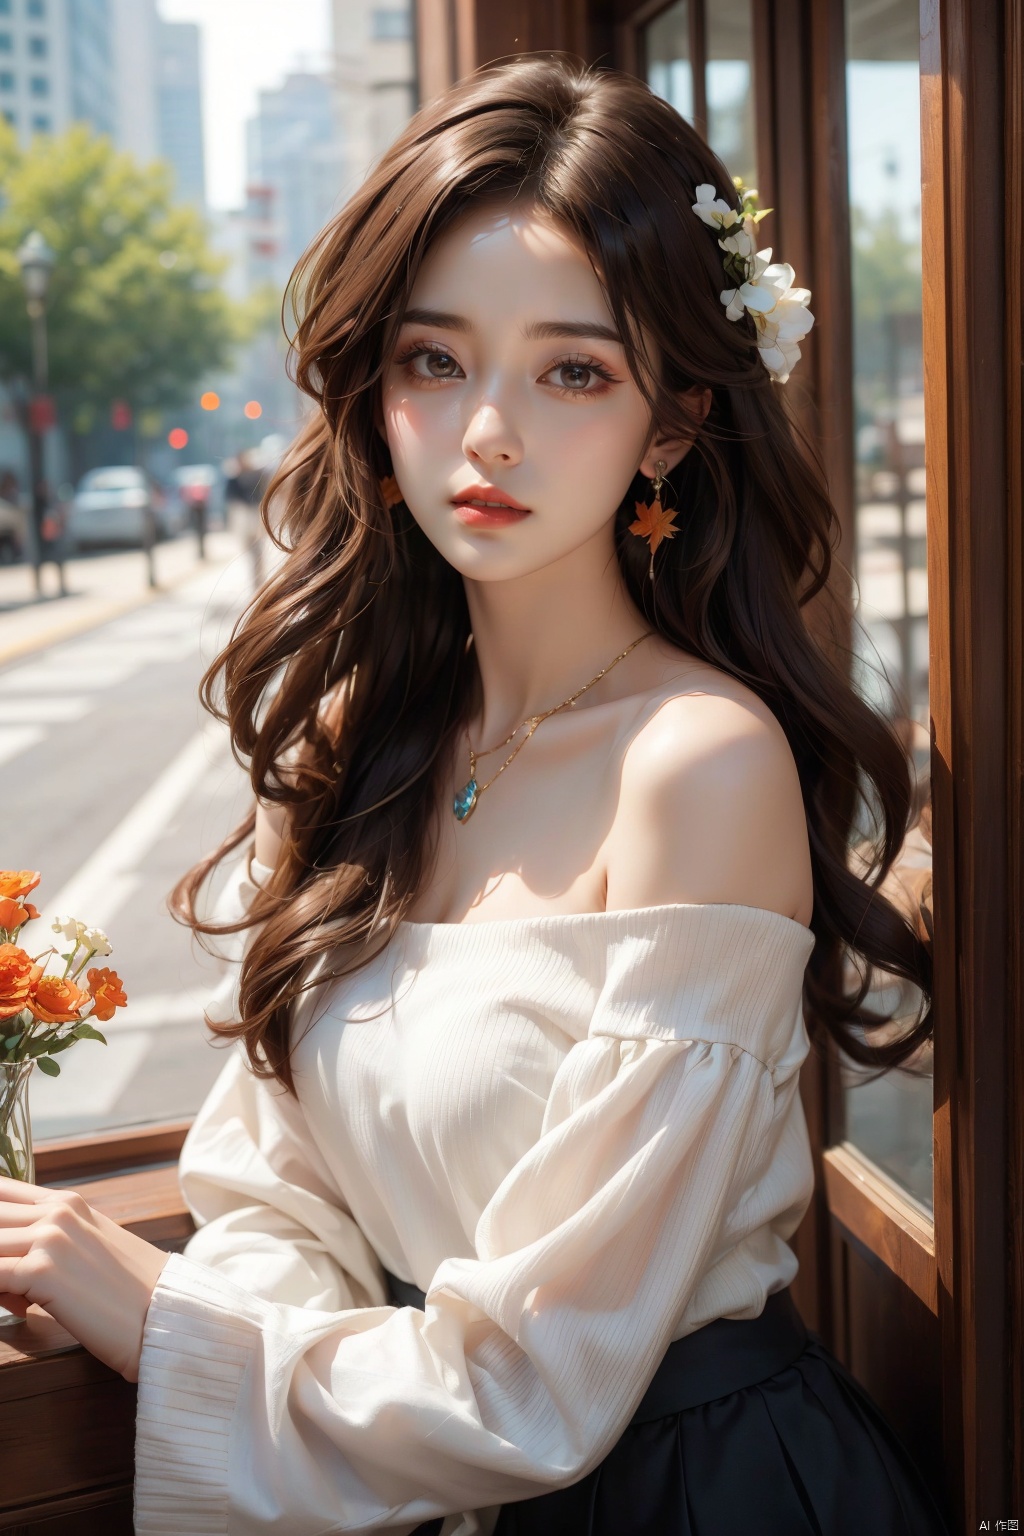  1 girl, jewelry, solo, earrings, long hair, forehead markings, black hair, necklace, bare shoulders, flowers, red lips, hair flowers, upper body, skirt, off shoulder, facial markings, head down, makeup, lips, candles, collarbones, long sleeves, tears streaming down, crying, Tyndall effect, 8k, large aperture, masterpiece of the century, sit, maple leaf, doorway, corridor, Sun on face, (\meng ze\)